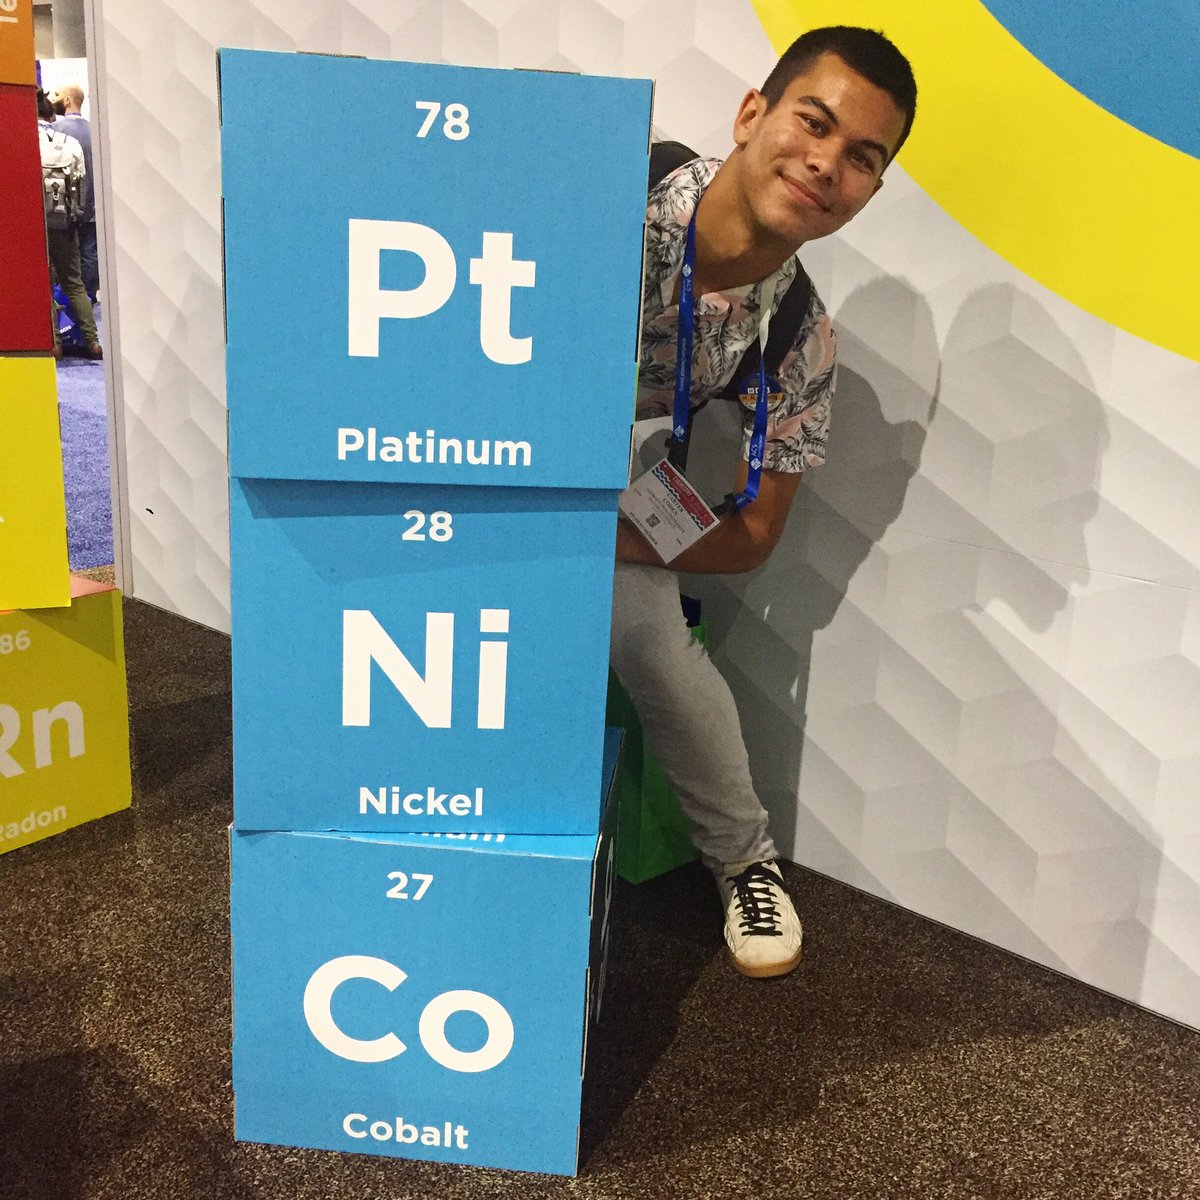 Y’ALL MAY I HAVE YOUR ATTENTION PLEASE—

Carter Cohen, my research mentee, IS AN ACS SCHOLAR!!!

He investigates electrocatalysts, presented at #ACSSanDiego, working on a paper,& co-authored another!

I’m SO PROUD & the world has to learn to keep up with him!! 😊🙏🏽

#RealTimeChem